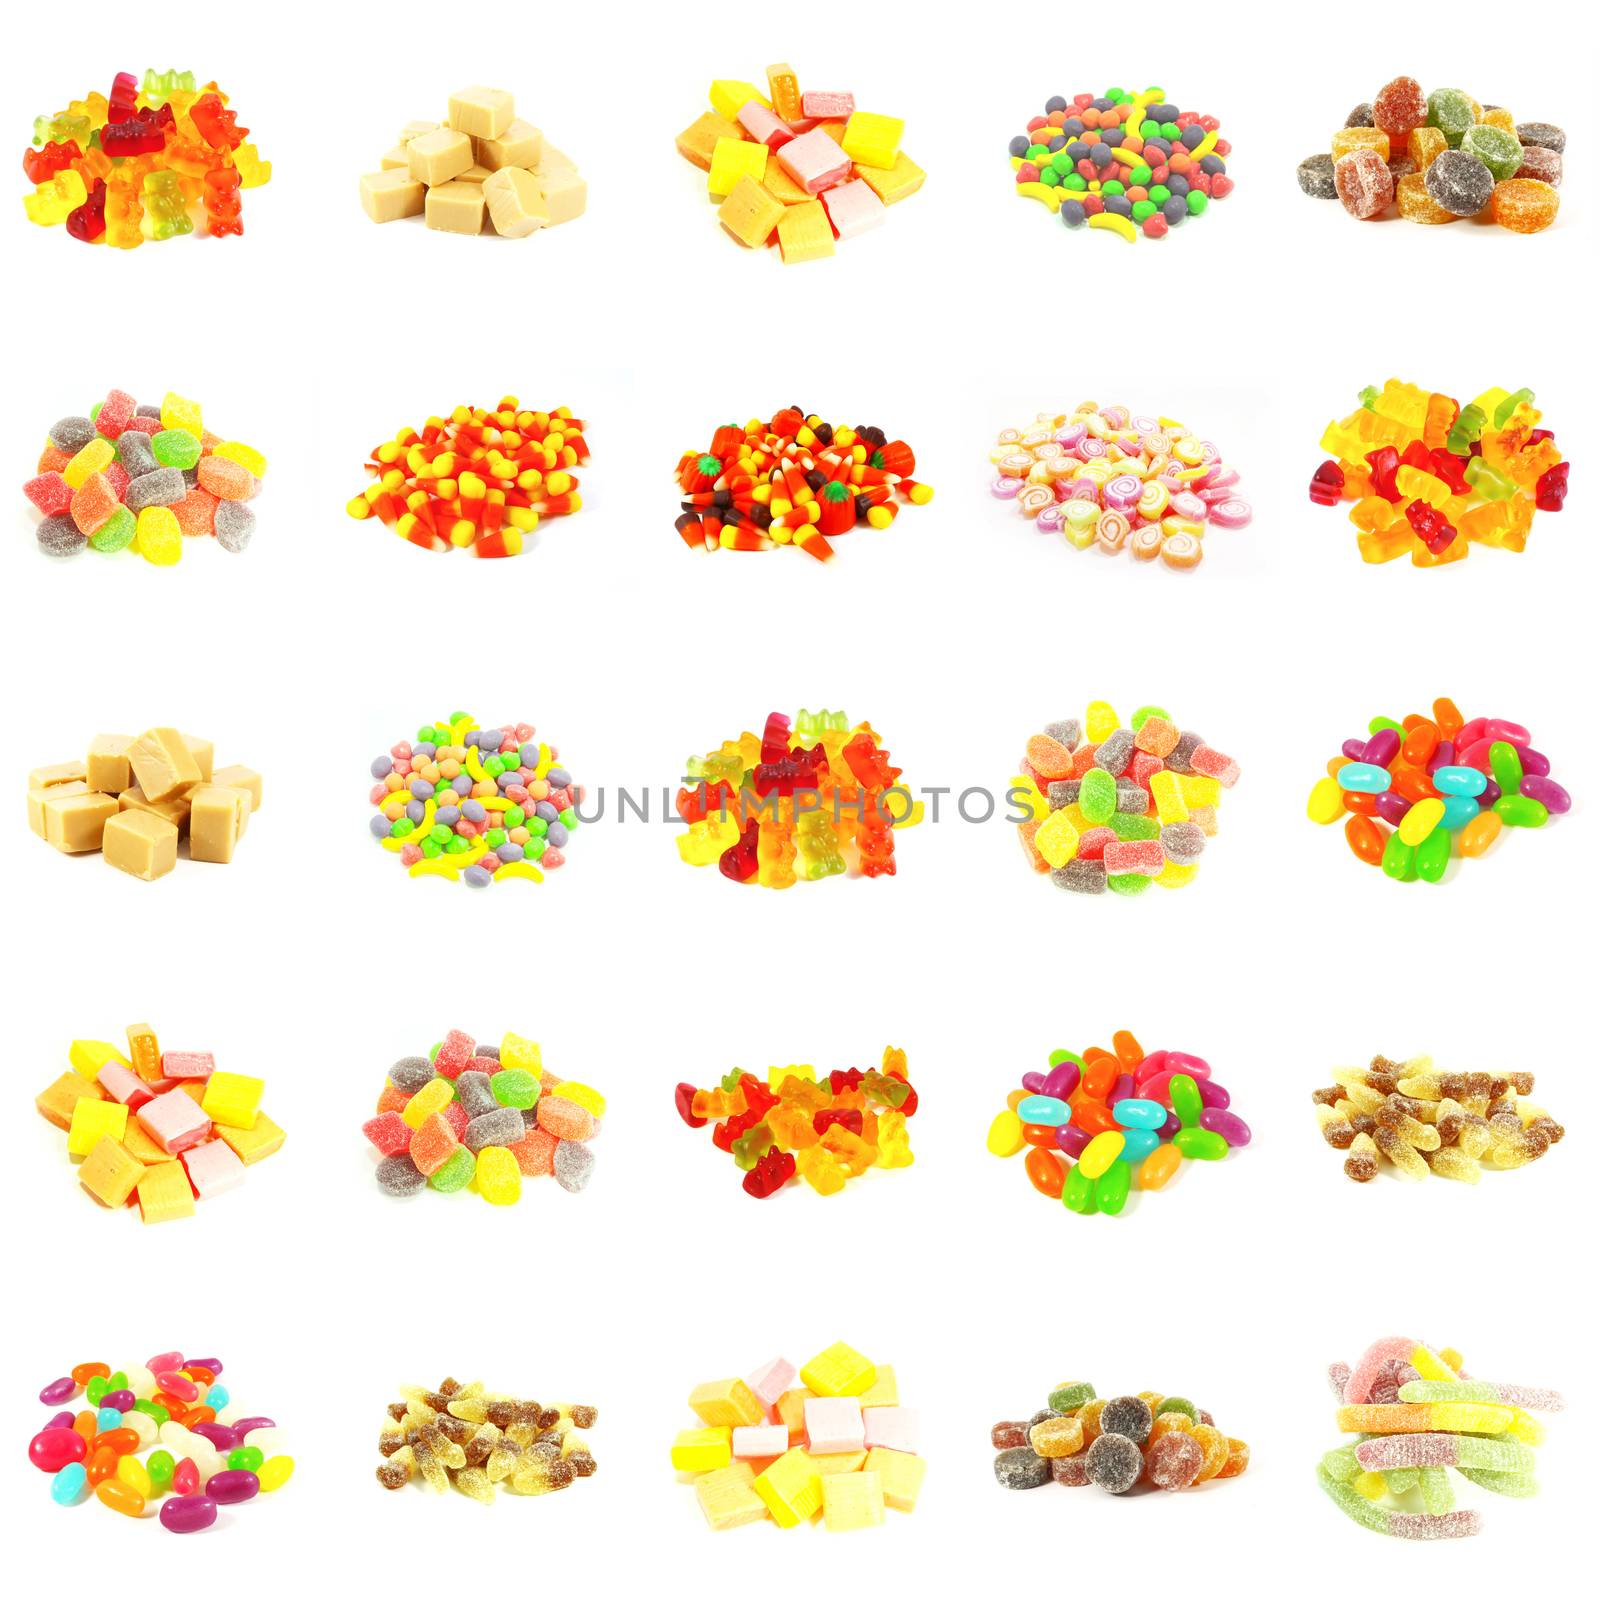 Seamless Sweets and Candy Pattern Background on White